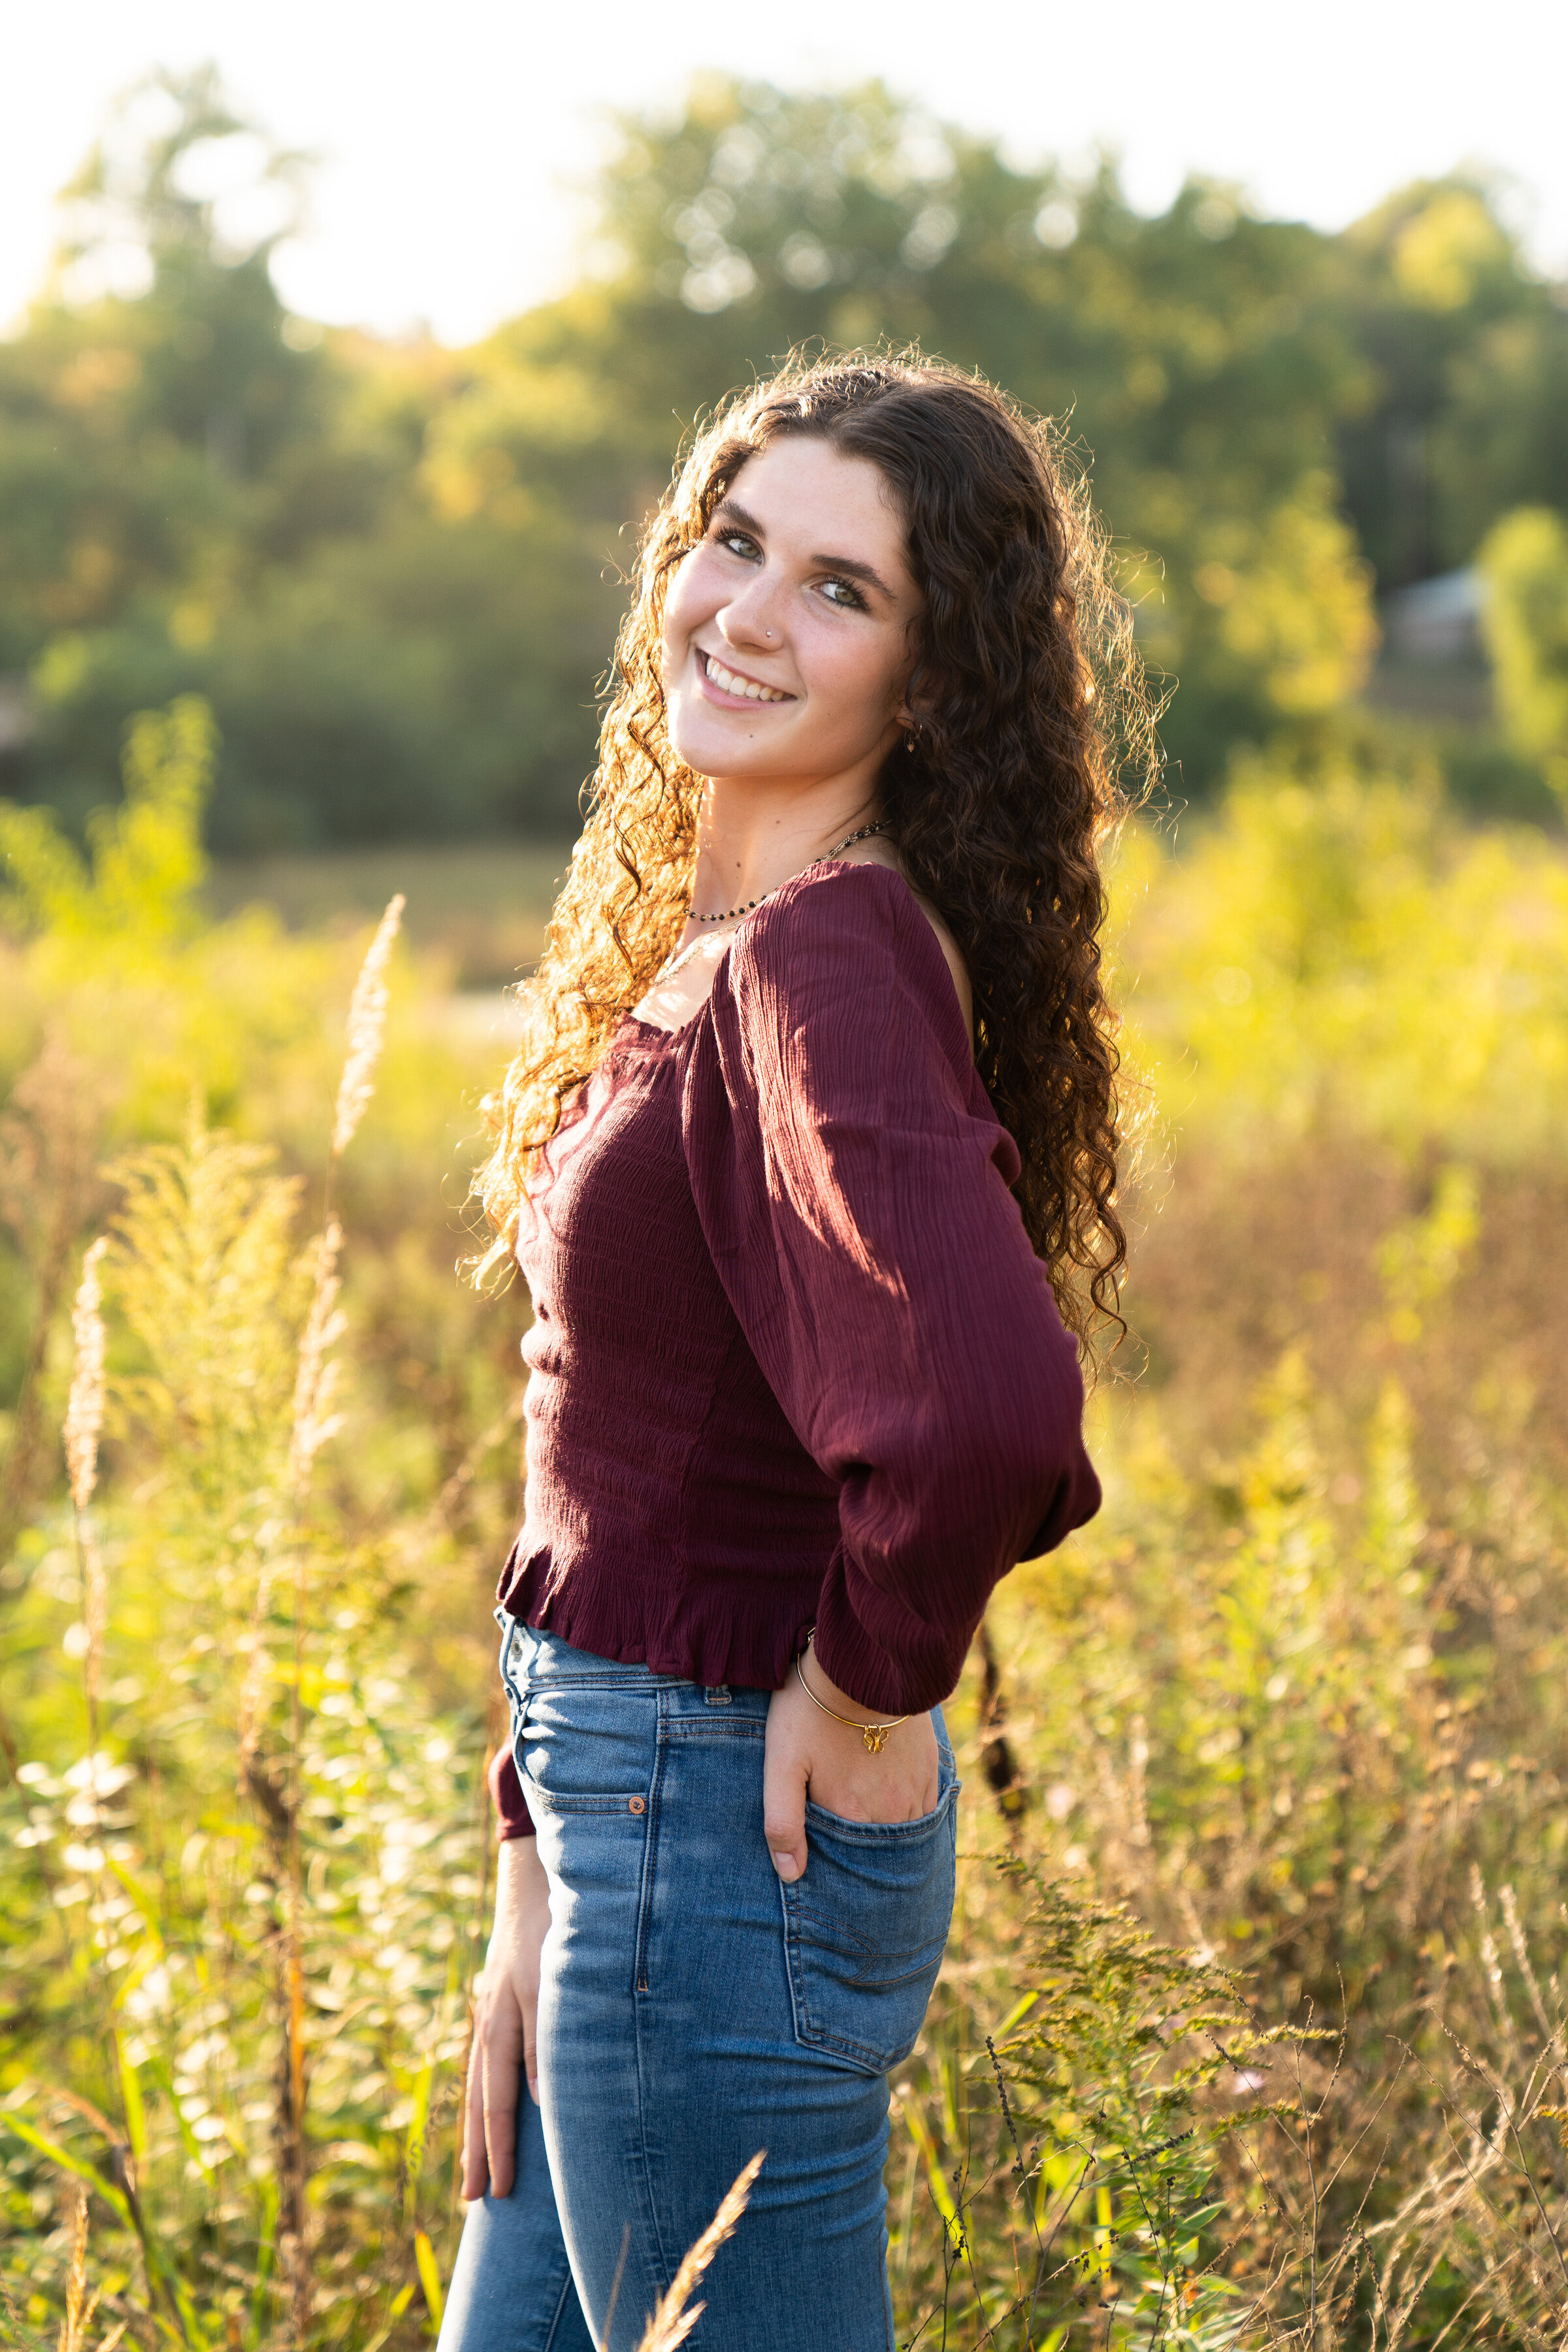 Girl poses in a field and smiles at the camera for her senior pictures.